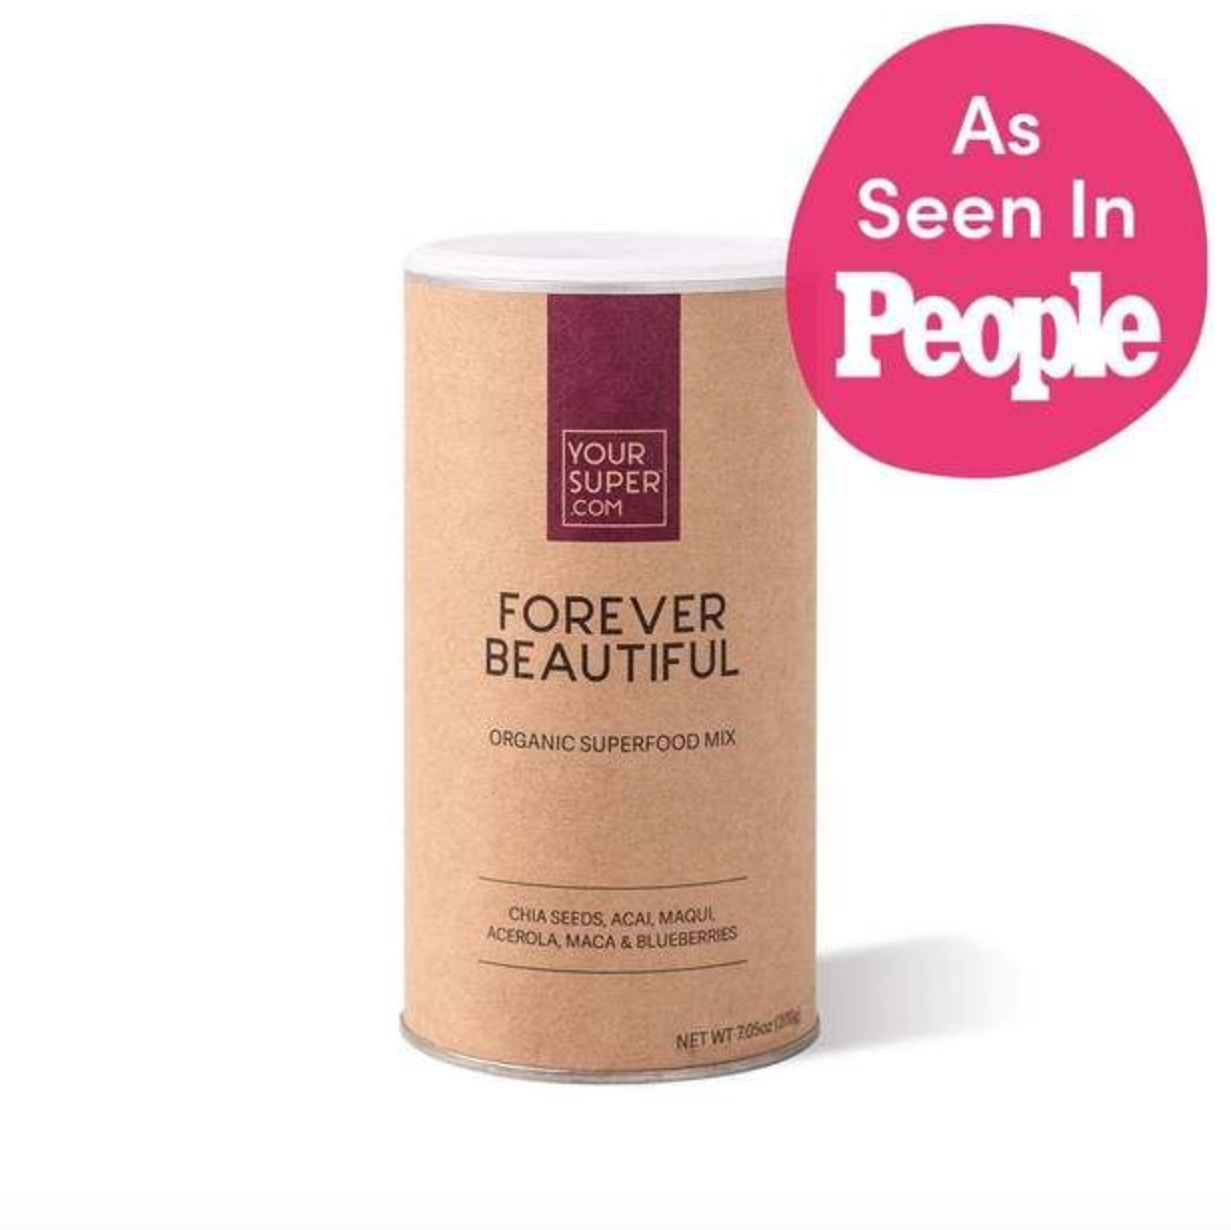 Your Super Forever Beautiful Superfood Blend – Organic Superfood Powder for  Healthy Skin and Hair, with Organic Açaí, Powder, Maqui Berry, Maca, and